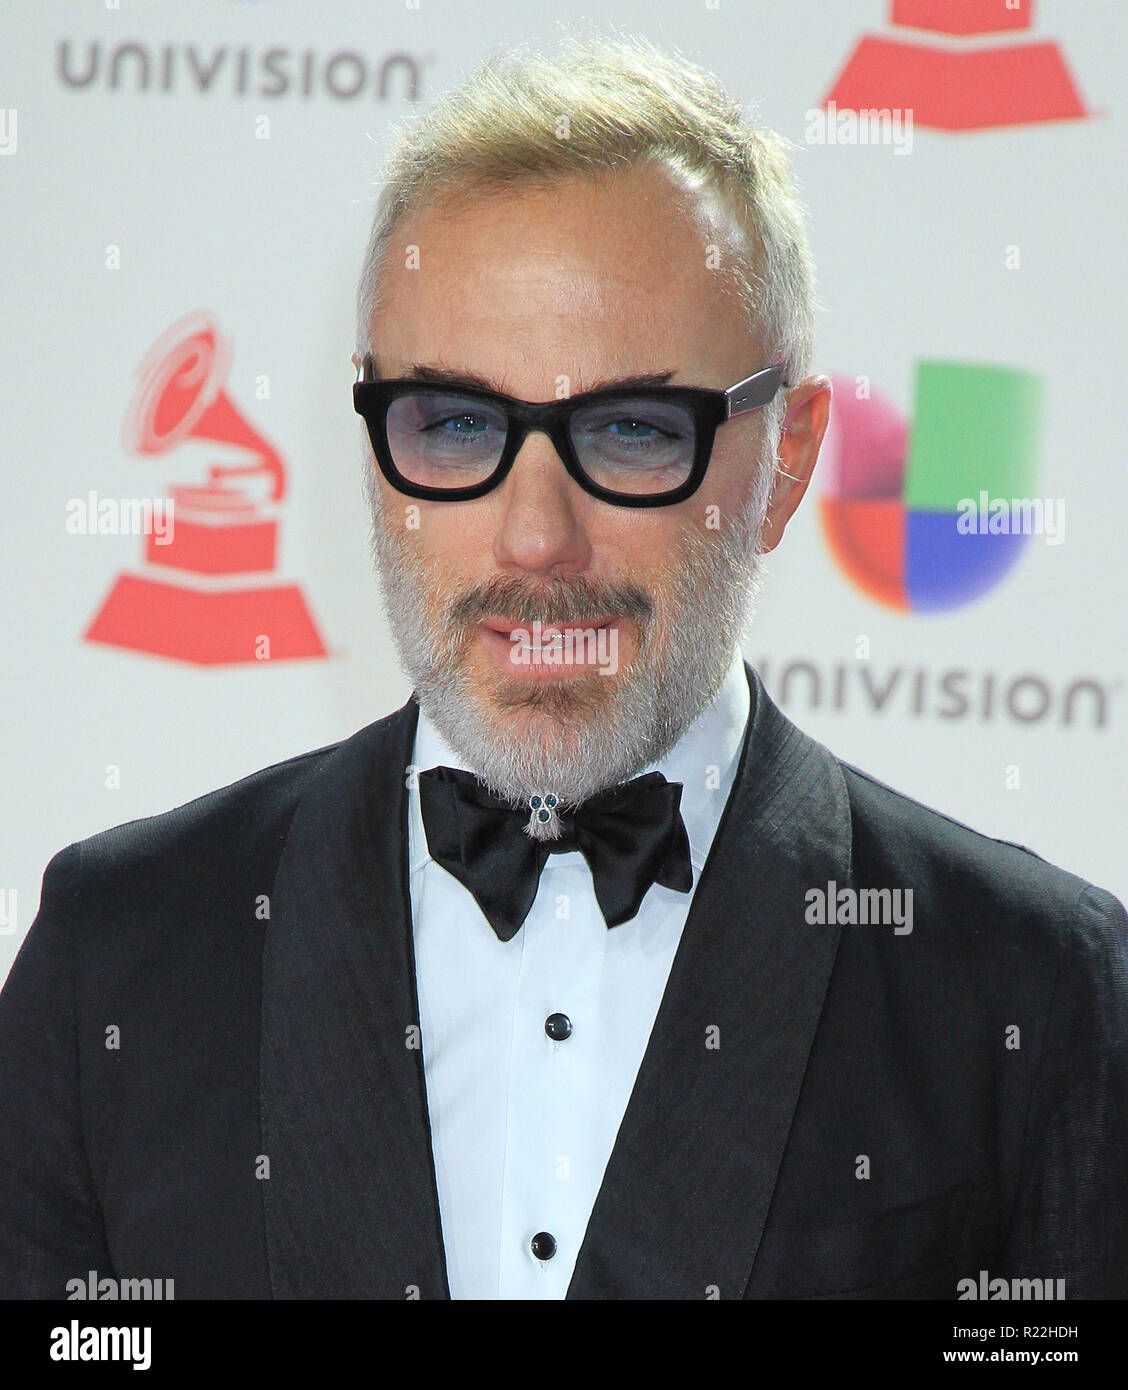 Las Vegas, Nevada, USA. 15th November, 2018. Bullone Gianluca Vacchi  attends attends the 19th annual Latin GRAMMY Awards at MGM Grand Garden  Arena on November 15, 2018 in Las Vegas, Nevada. Photo: